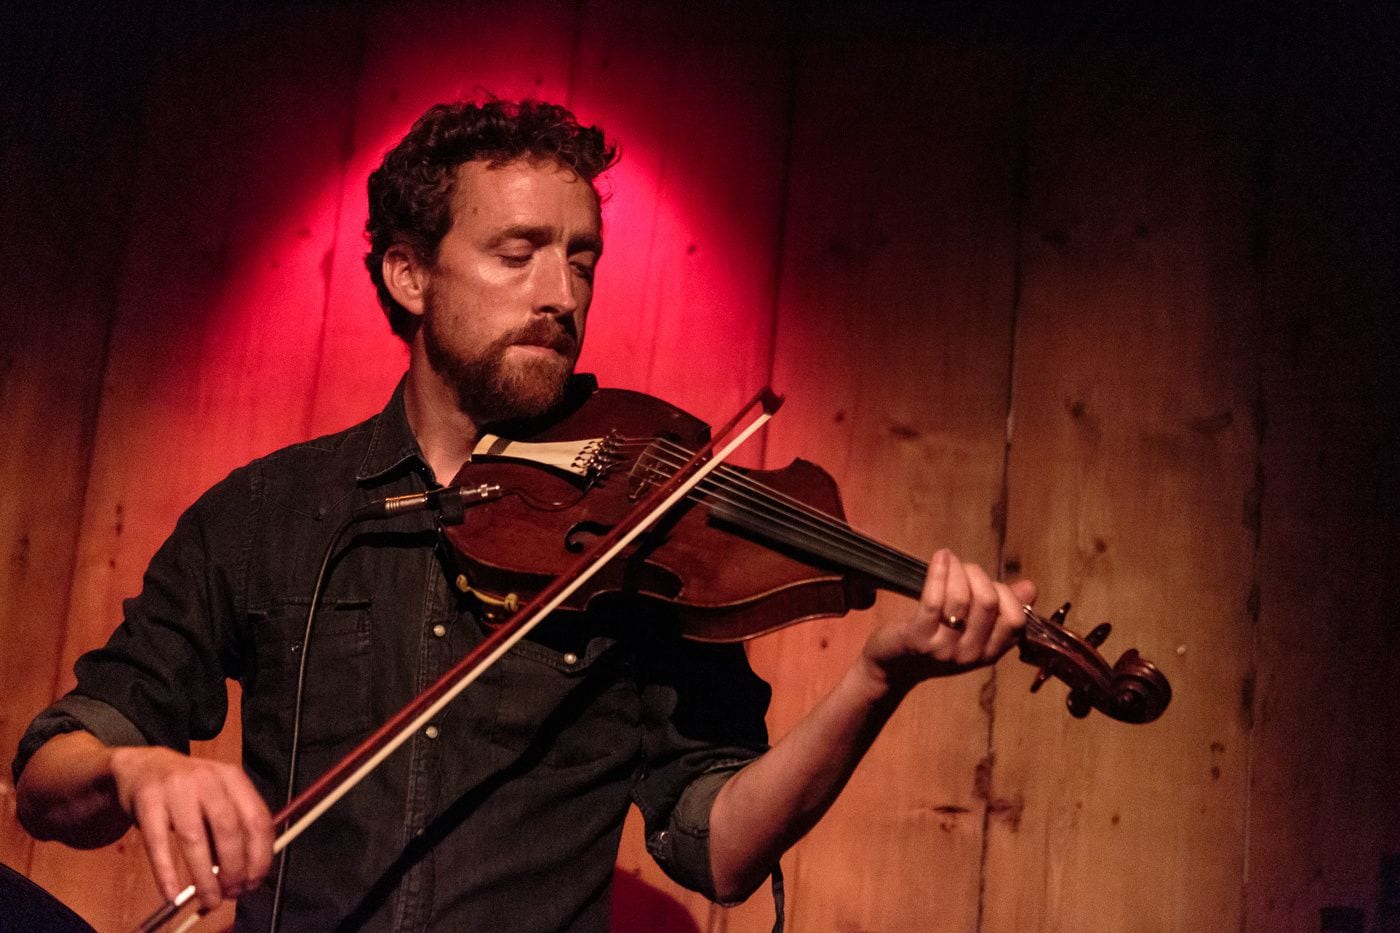 Harmony with the Irish Feminine: An Interview with Colm Mac Con Iomaire